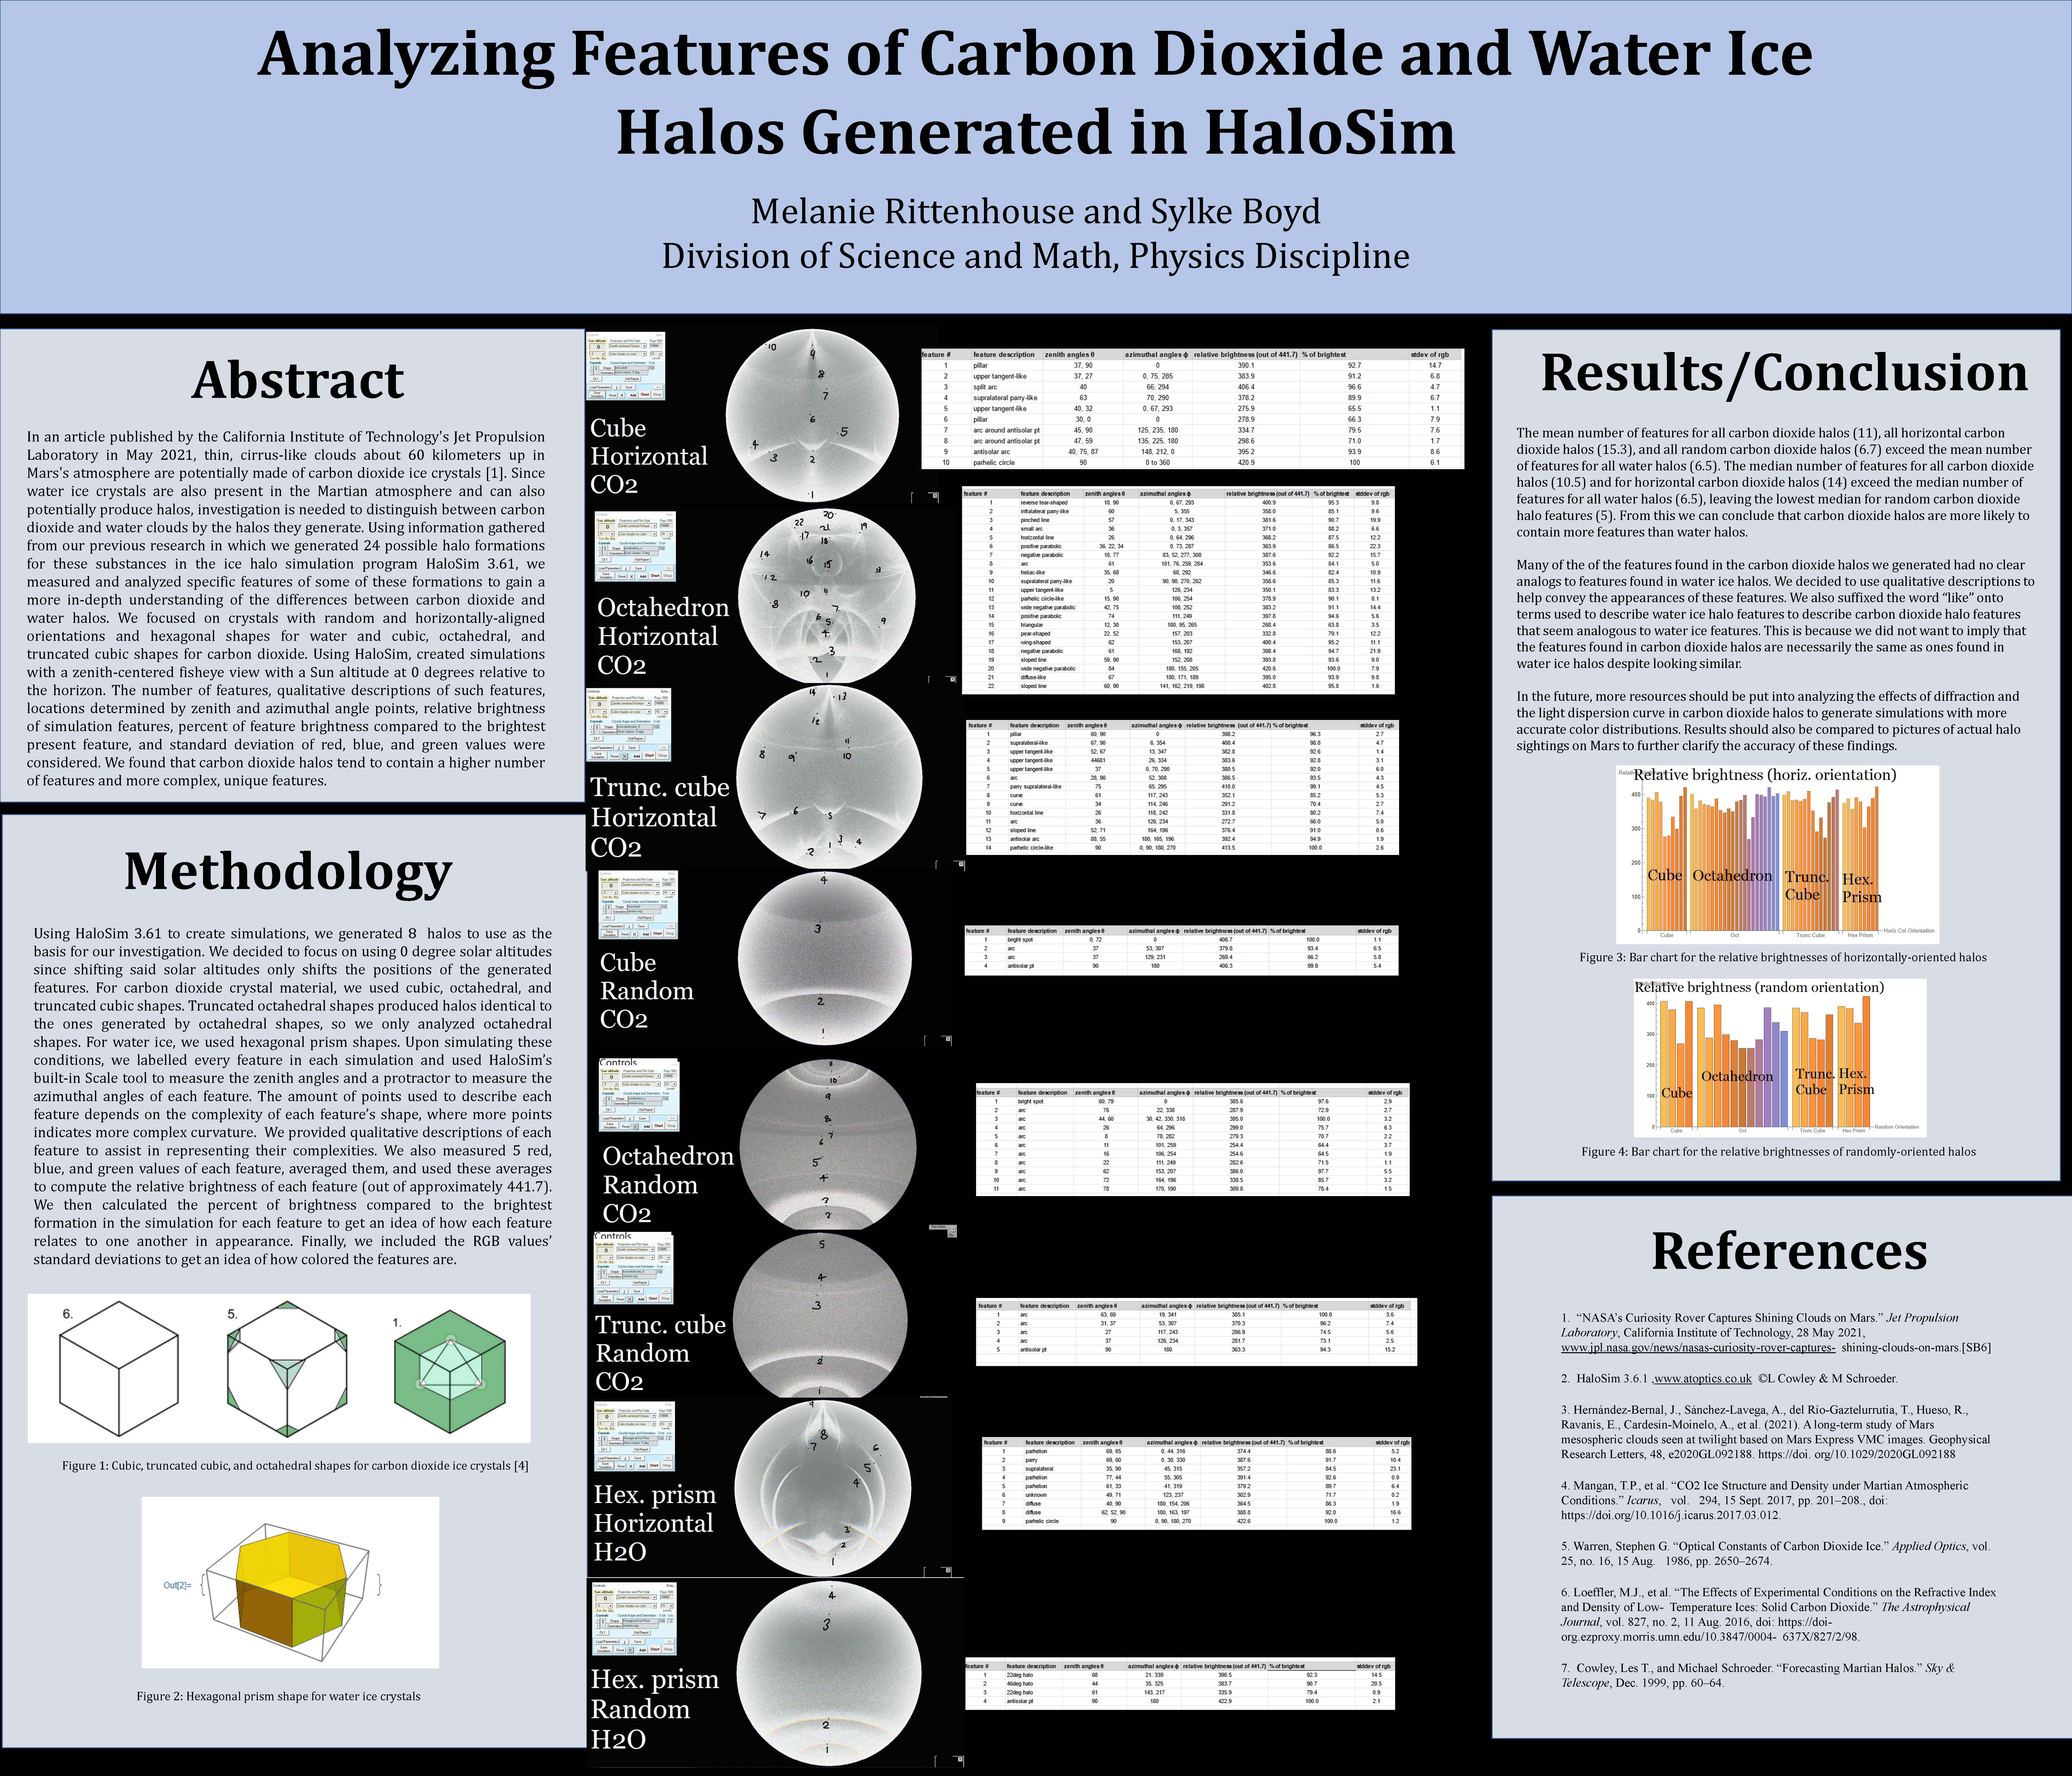 A scientific poster named Analyzing Features of Carbon Dioxide and Water Ice Halos Generated in HaloSim, with text and graphs